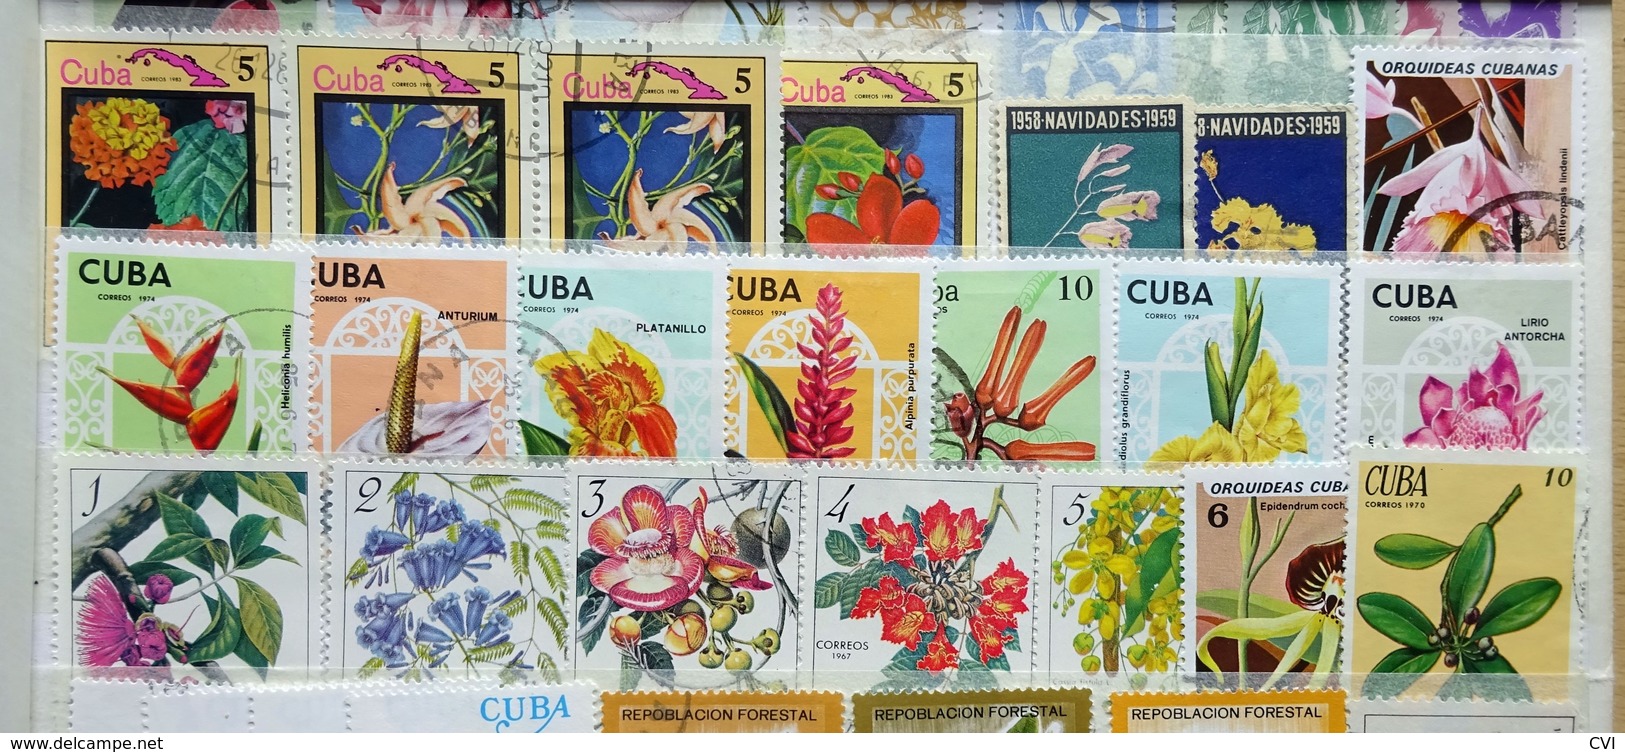 Cuba early to modern in Stockbook, Revenues, Airmail, Animals, Sports, Birds, Flowers, Butterflies, Trains, Thematic.